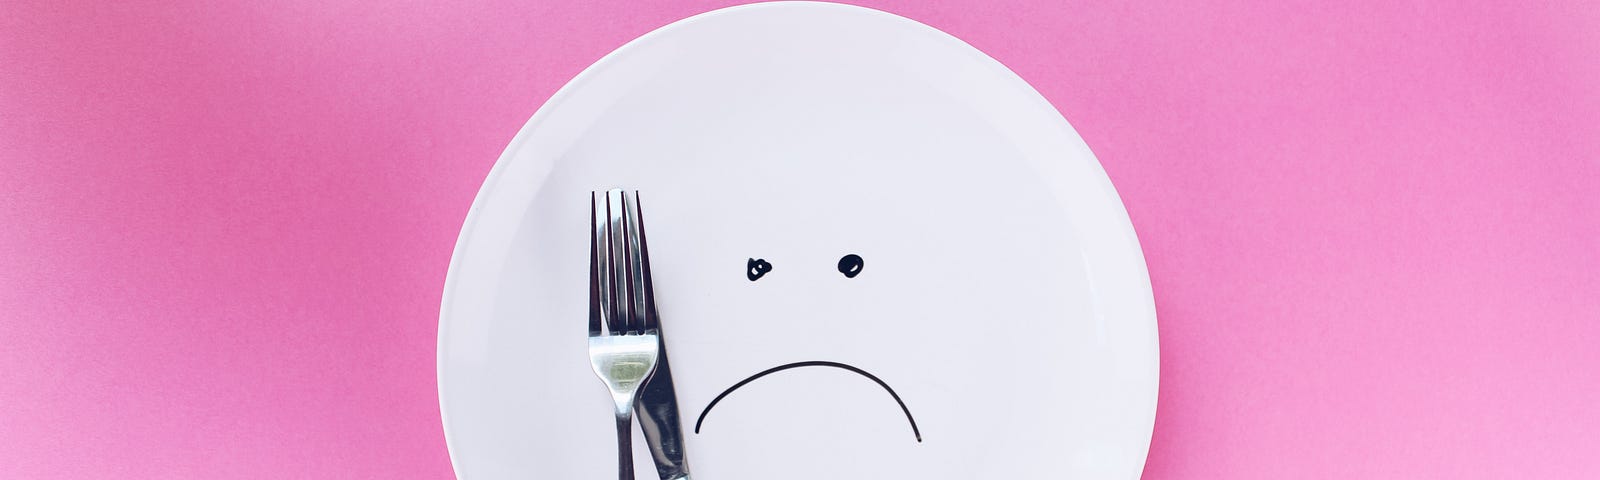 plate with frowning face drawn on it